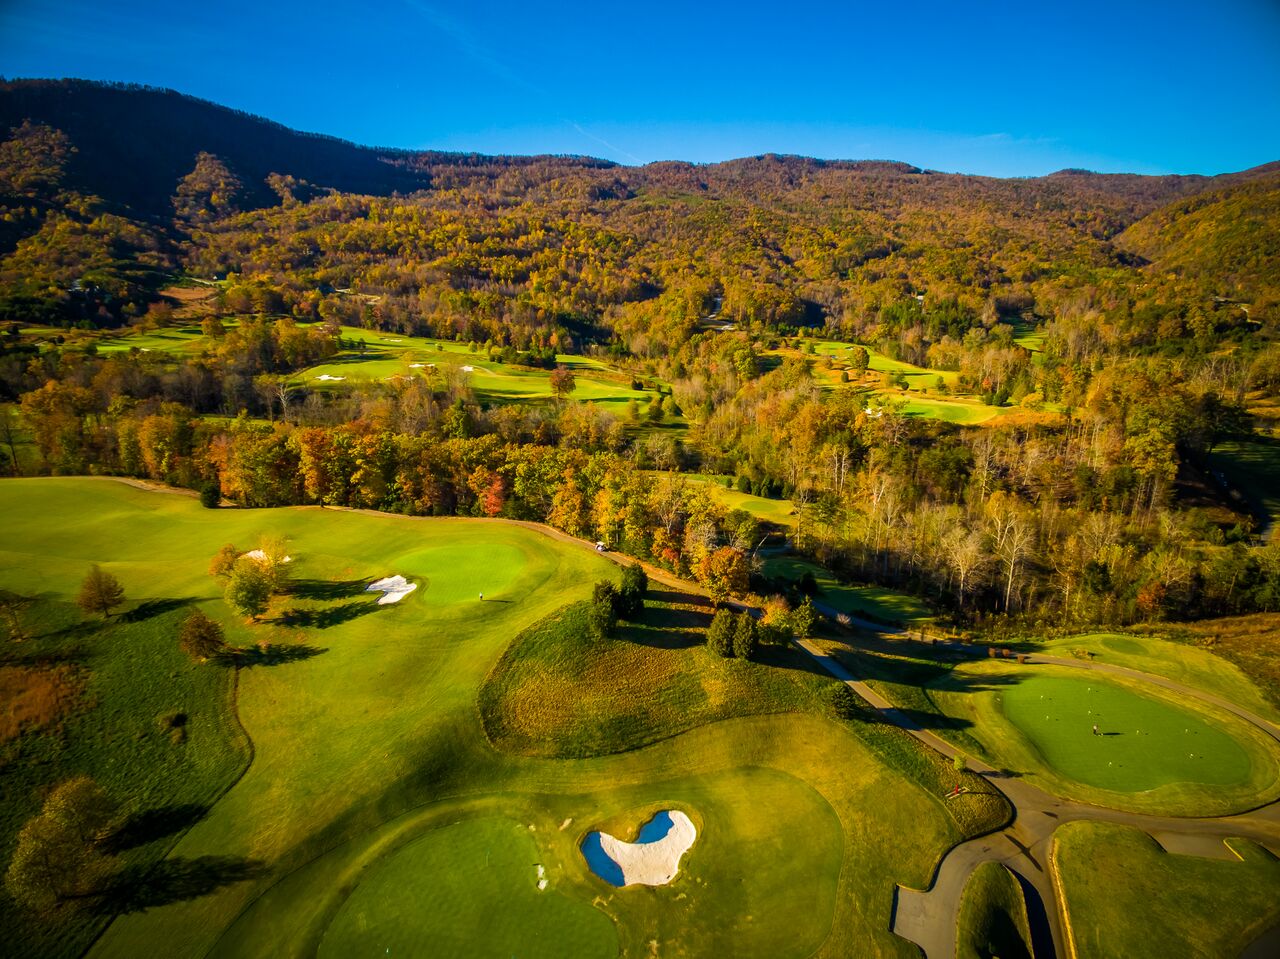 Aerial view of Bright's Creek Golf Club in the fall in the Blue Ridge Mountains